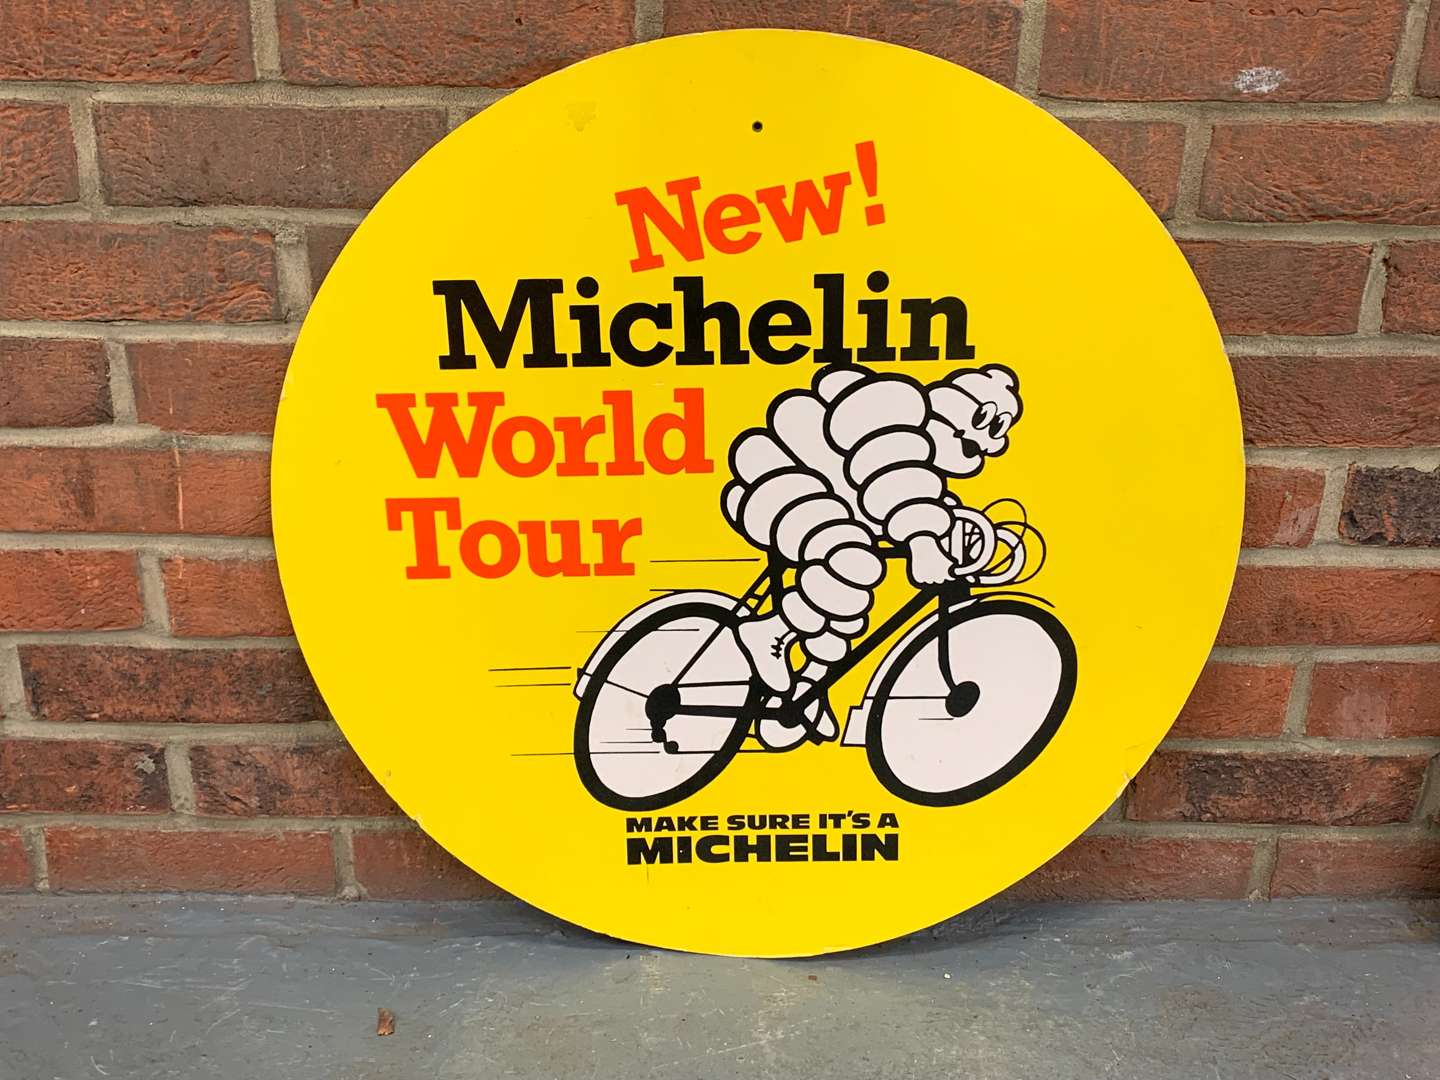 <p>Michelin Cycle Tyre's Circular Cardboard Sign</p>